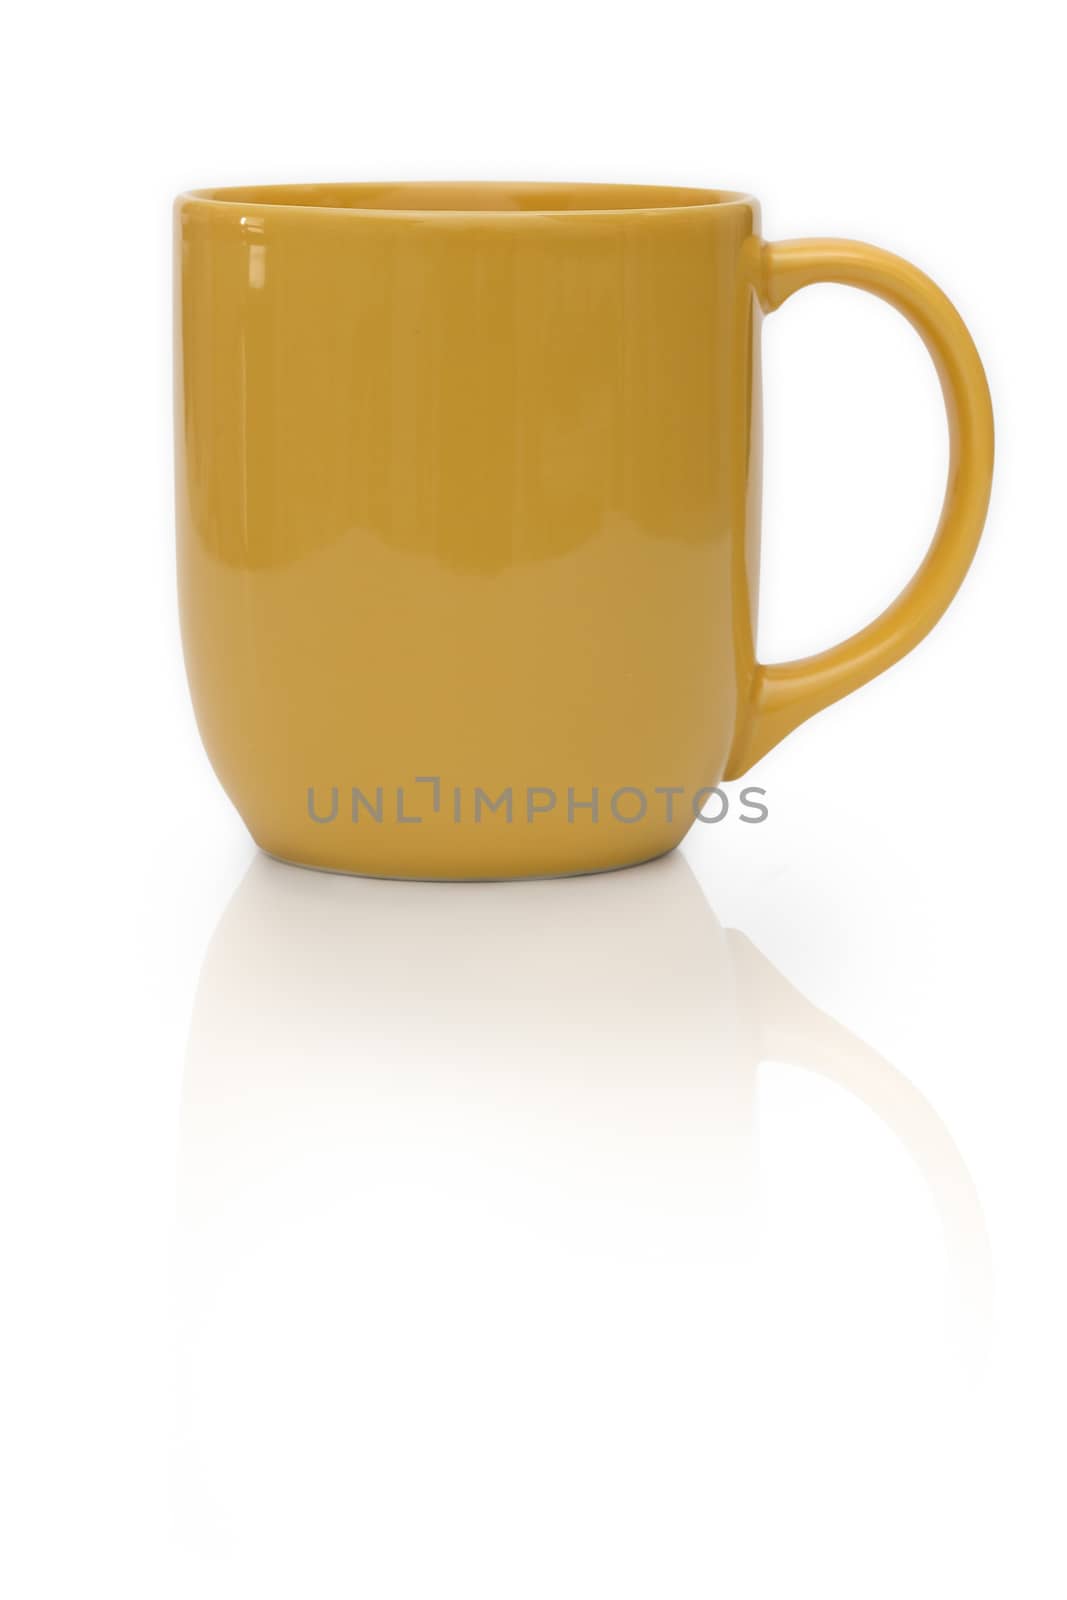 yellow ceramic mug or Coffee cup isolated on white background.